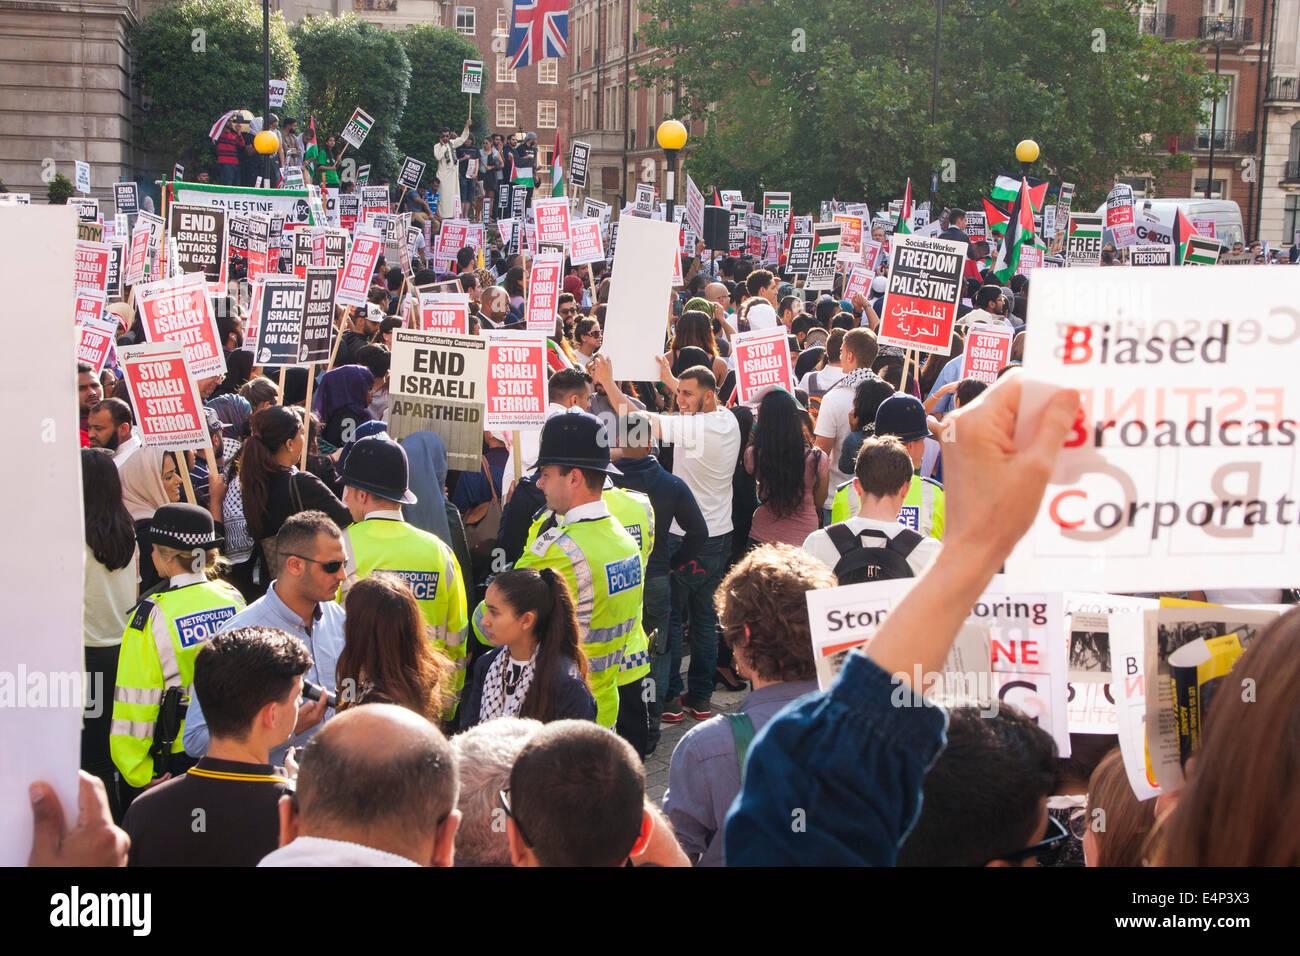 London, UK. 15th July, 2014. Palestinians and their supporters demonstrate outside the BBC's headquarters against an alleged pro-Israeli bias in their coverage of Palestinian affairs. Credit:  Paul Davey/Alamy Live News Stock Photo